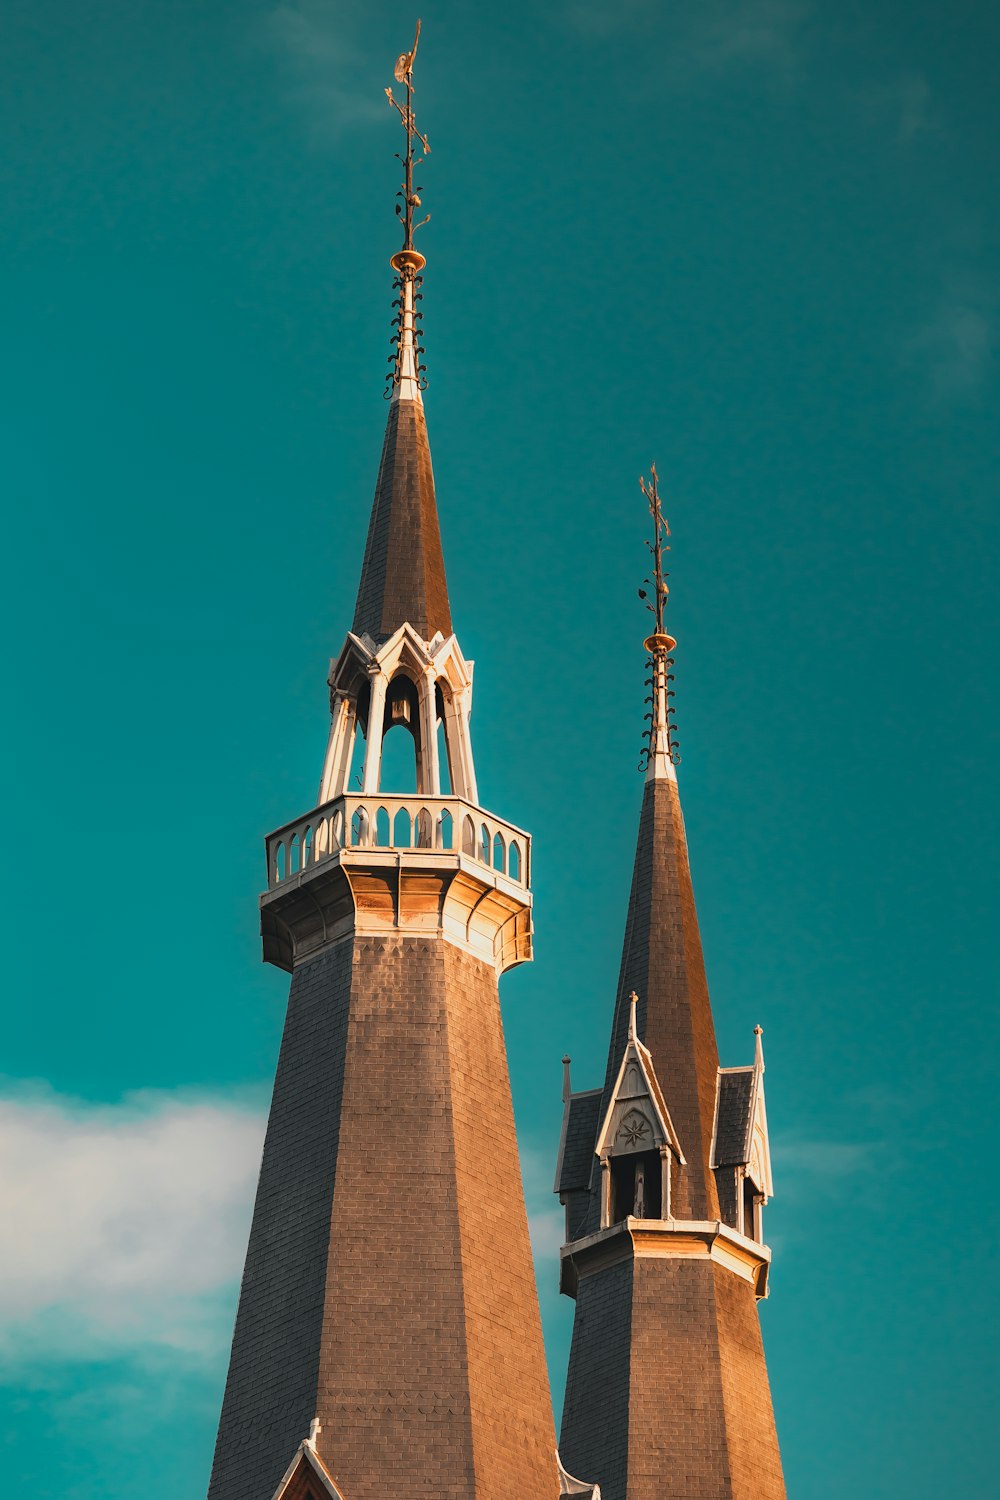 a church steeple with a clock on it